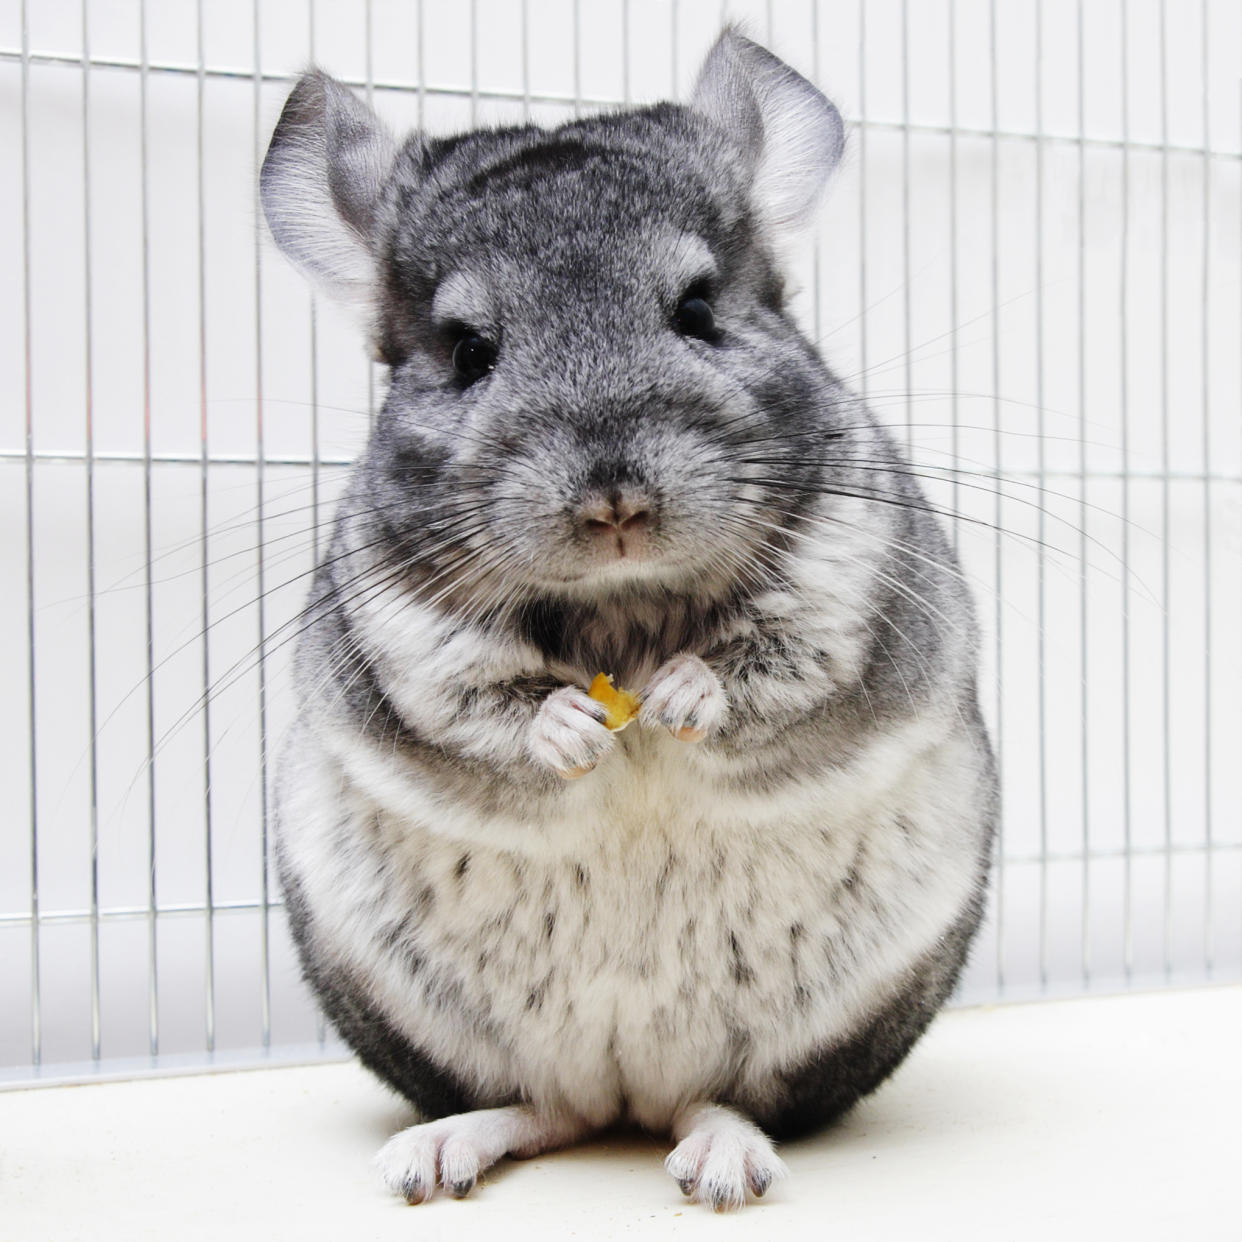 https://www.gettyimages.co.uk/detail/photo/chinchilla-in-his-cage-royalty-free-image/91771491